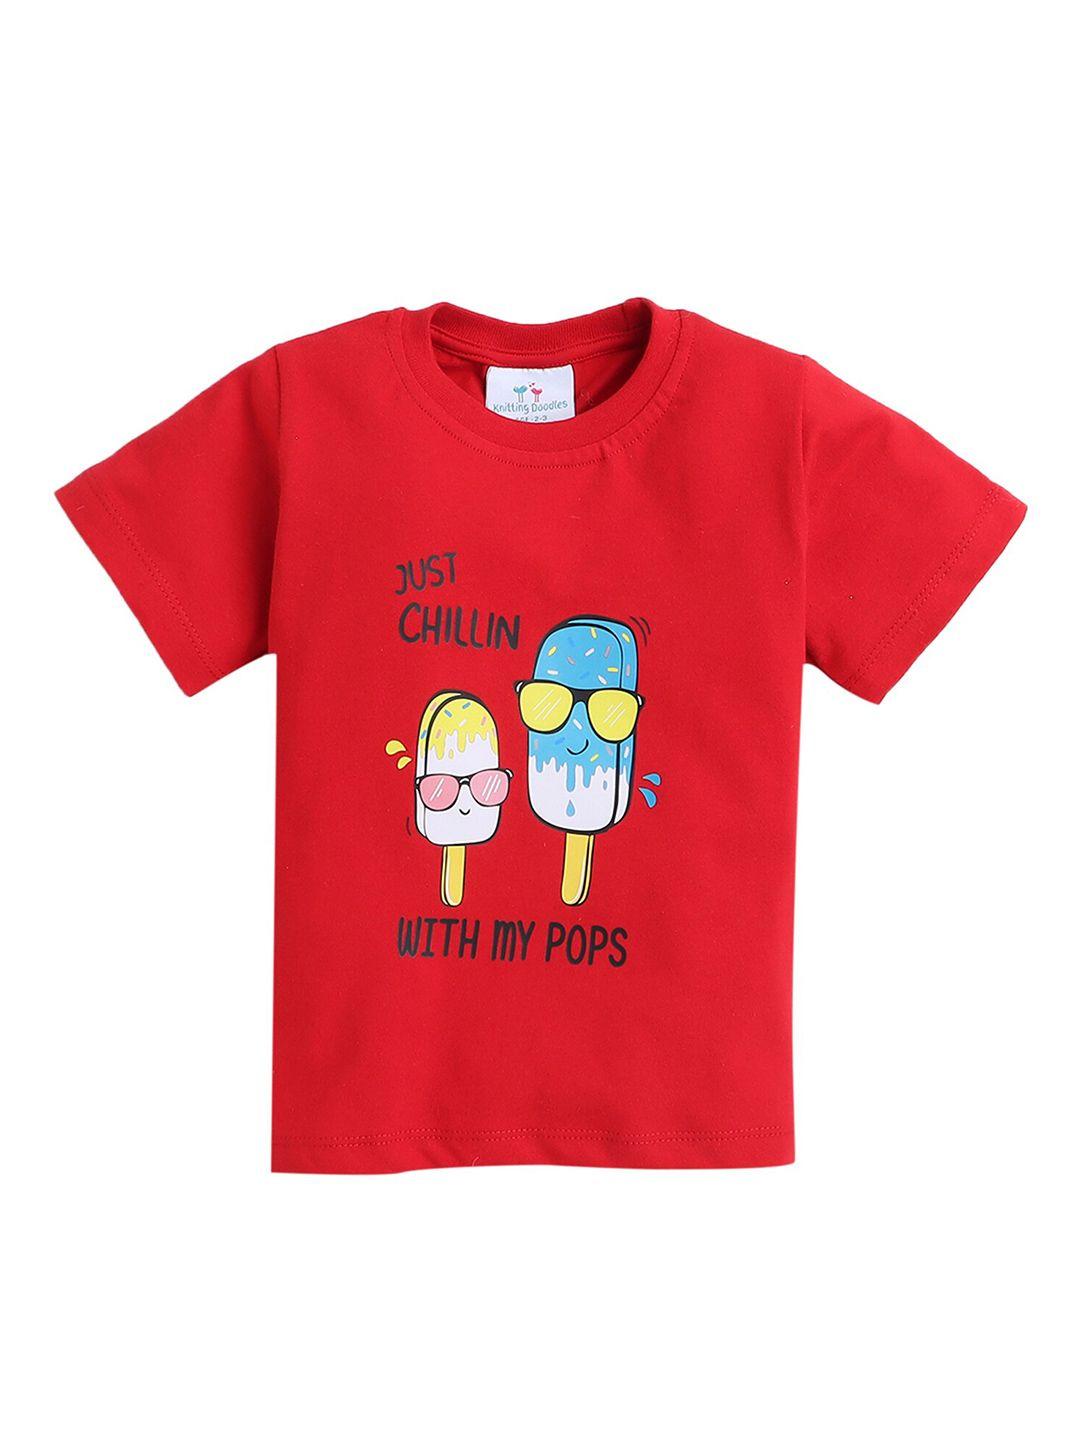 knitting-doodles-boys-just-chilling-printed-round-neck-regular-fit-cotton-t-shirt